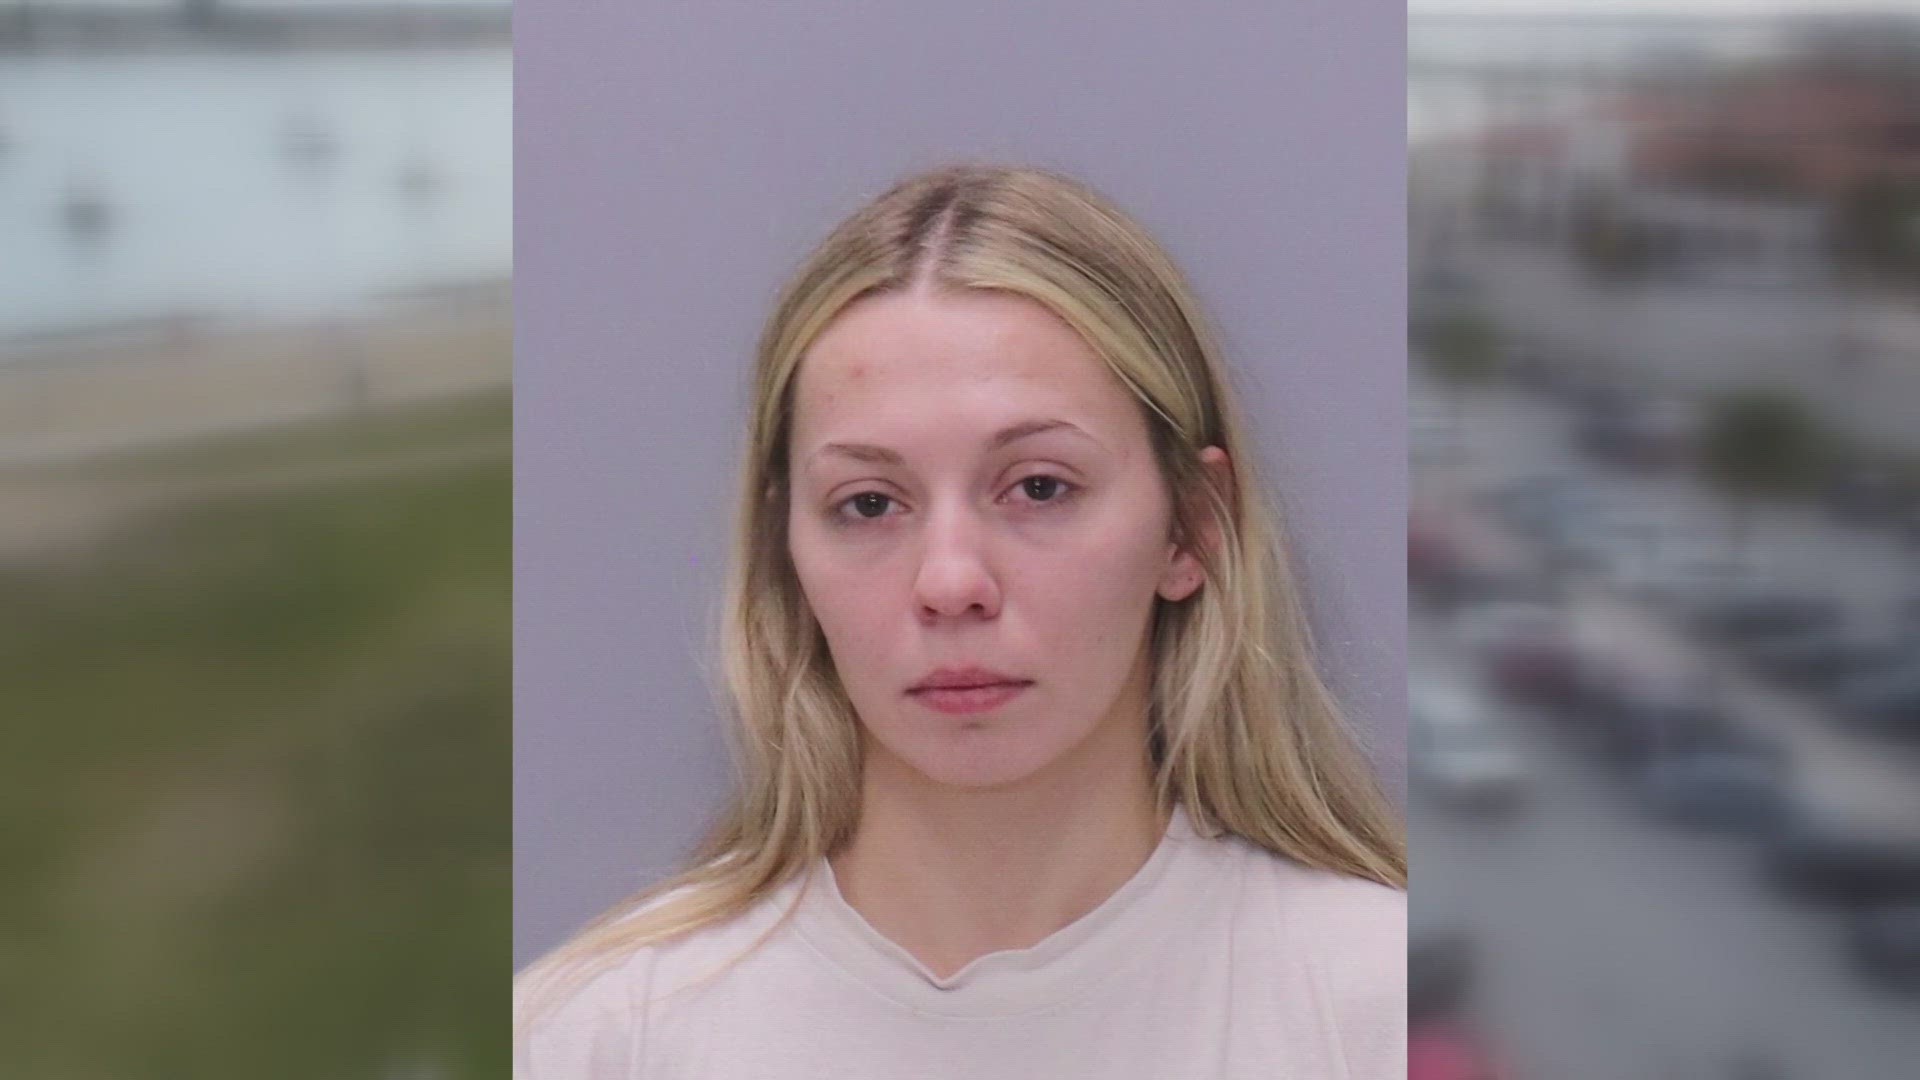 A man and woman were arrested after hitting two pedestrians in a DUI crash Sunday morning in the area of the Castillo de San Marcos National Monument.